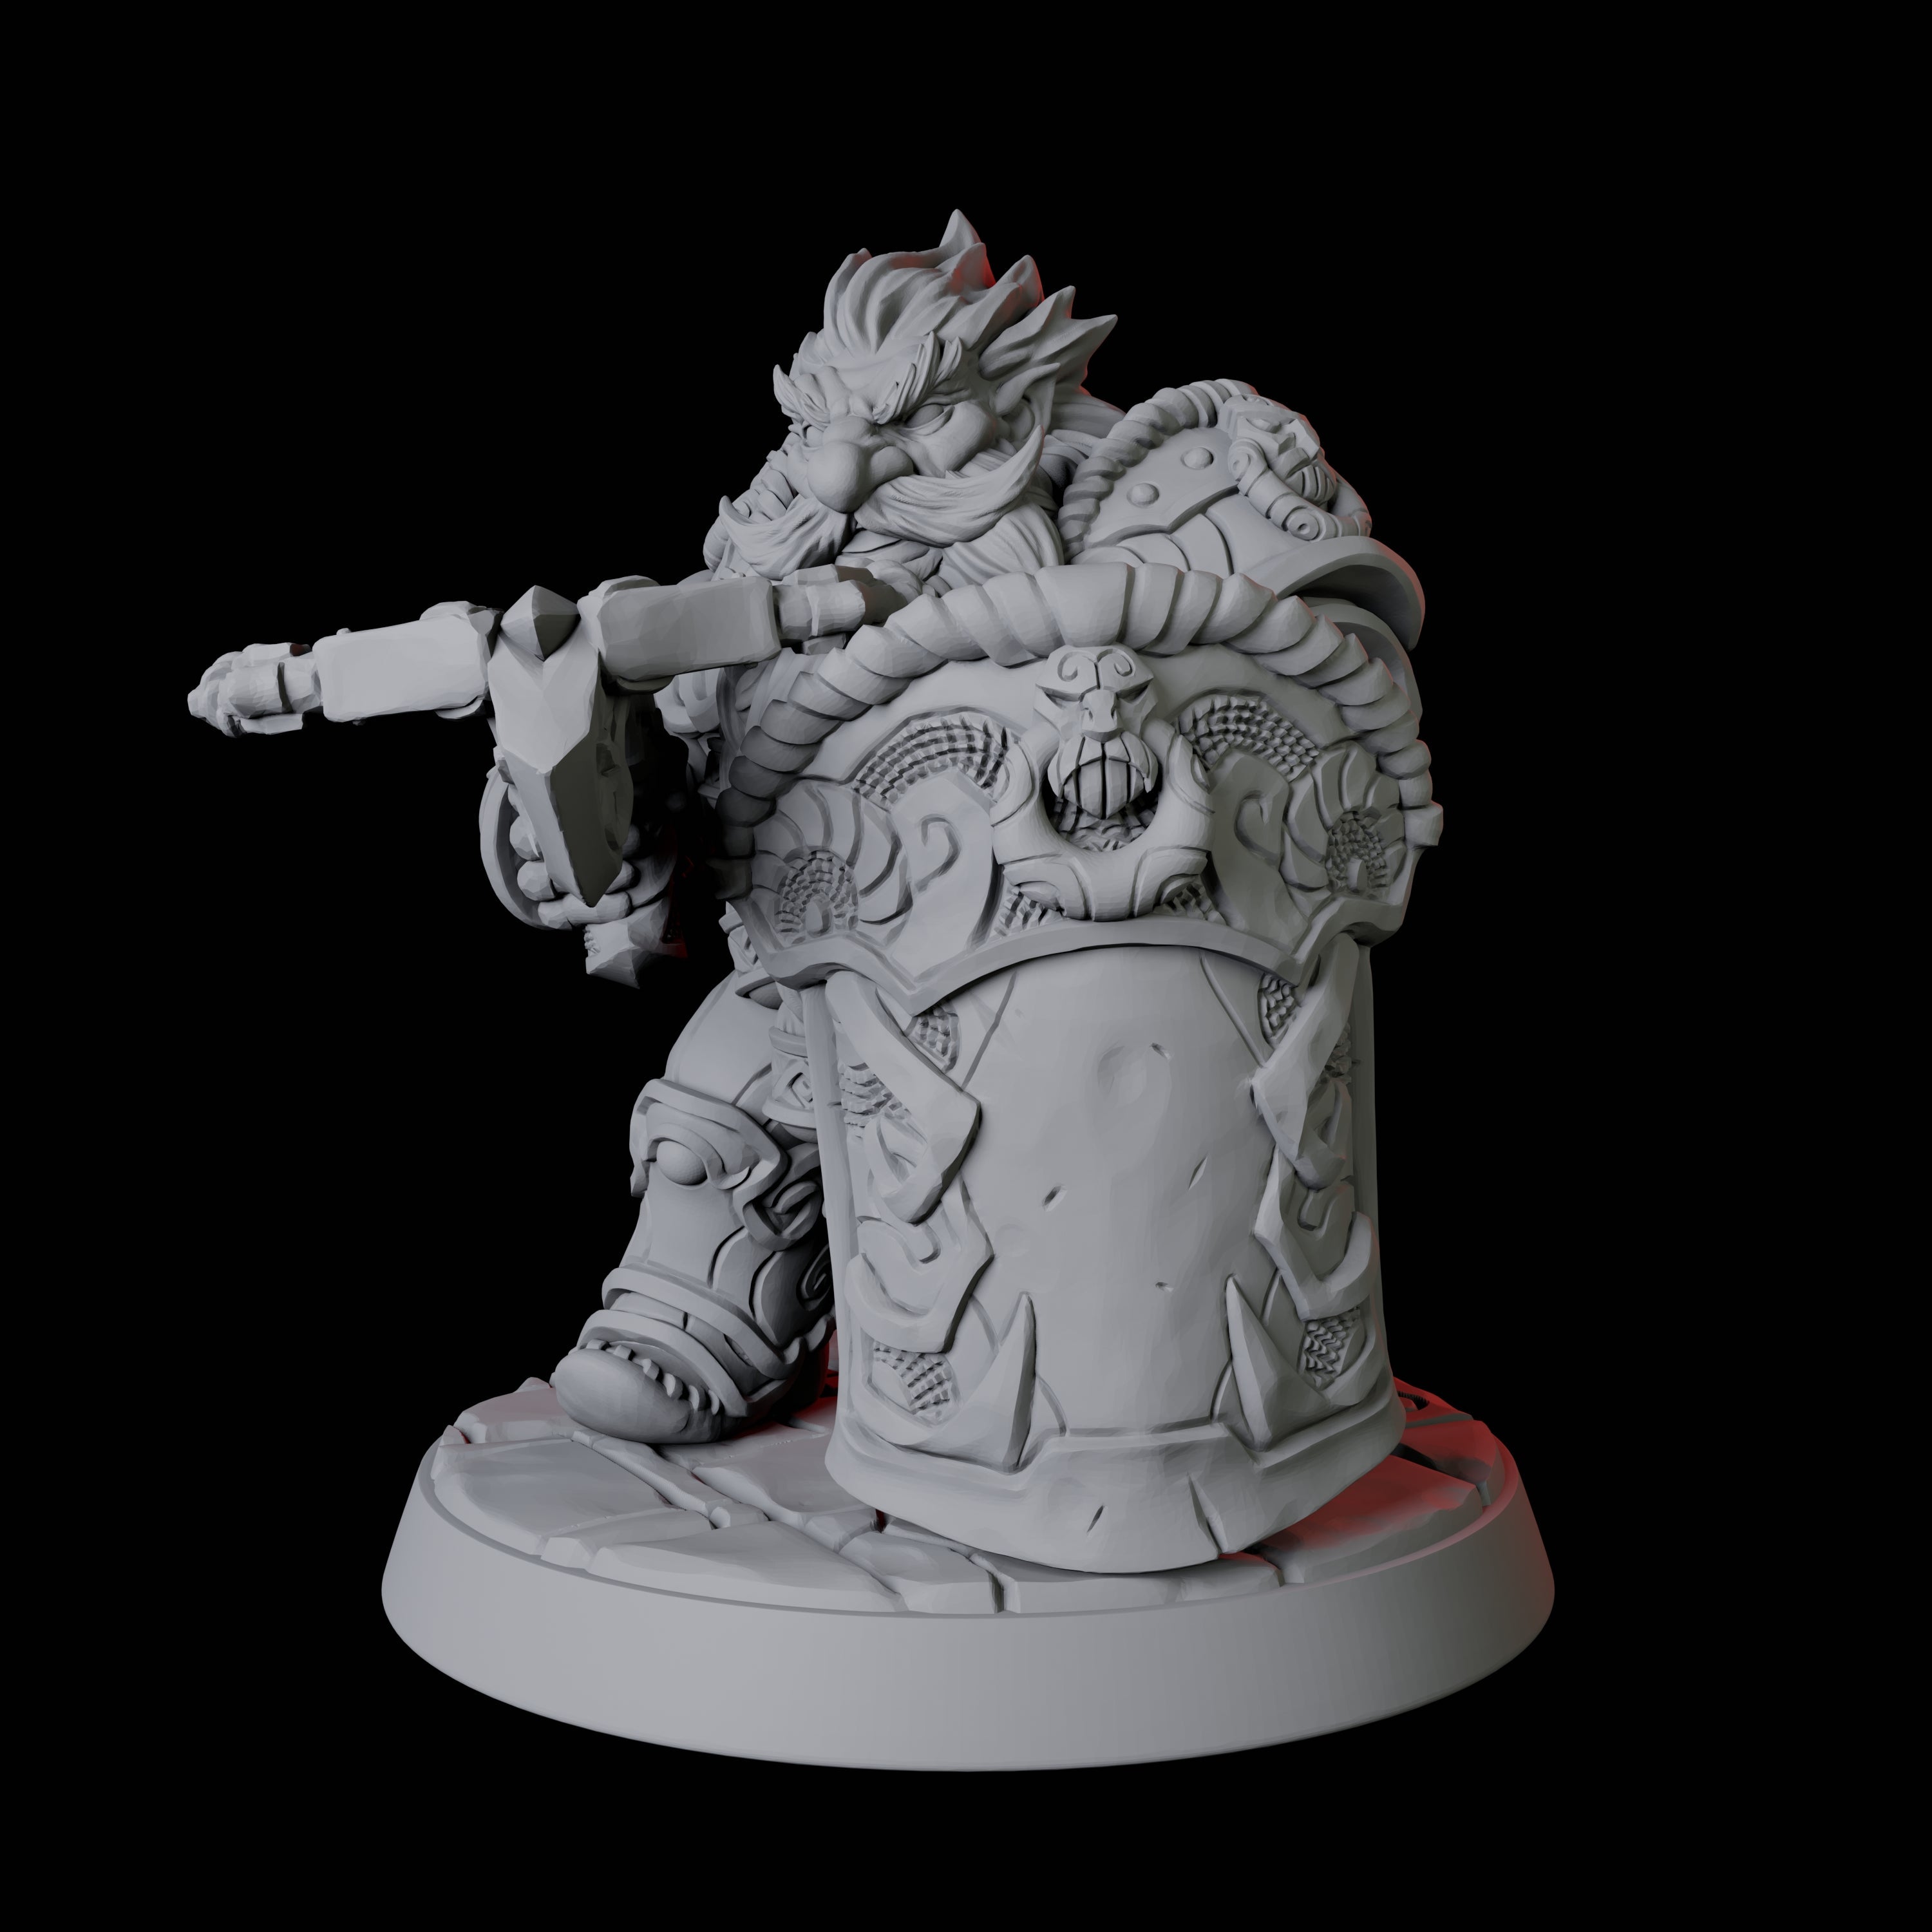 City Guard Dwarf C Miniature for Dungeons and Dragons, Pathfinder or other TTRPGs